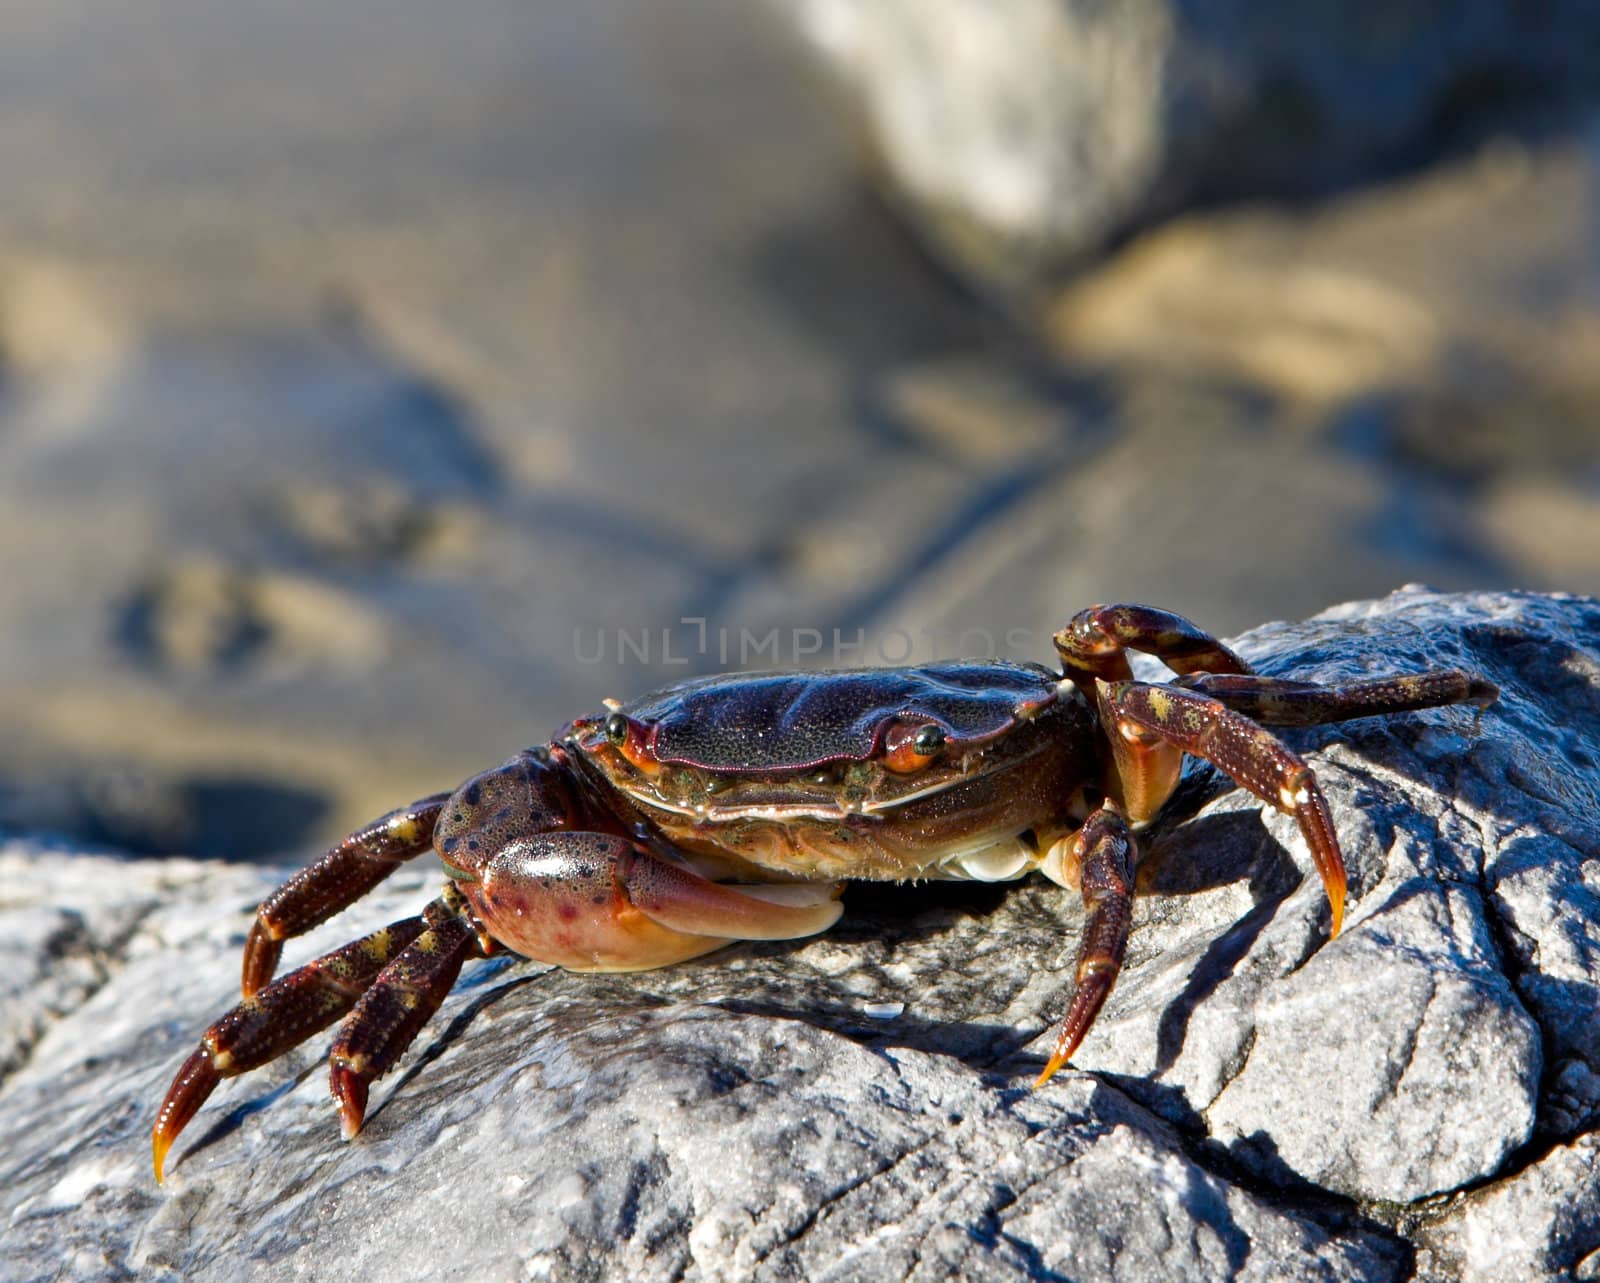 A soft shell crab on a rock at the beach with an out of focus sandy background.